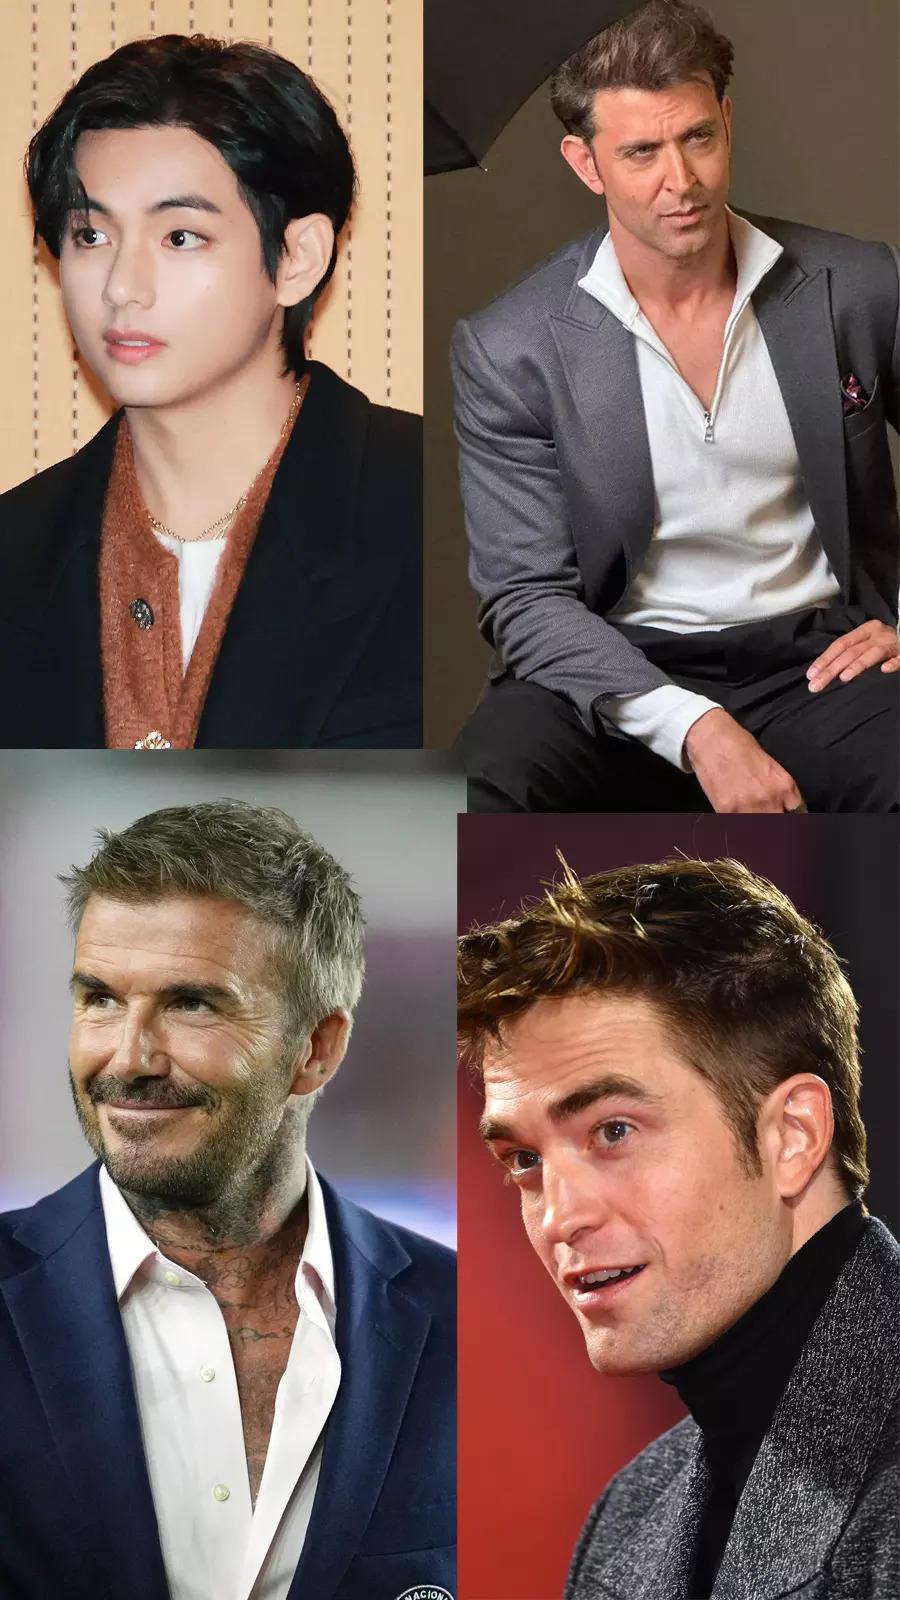 10 most handsome men in the world